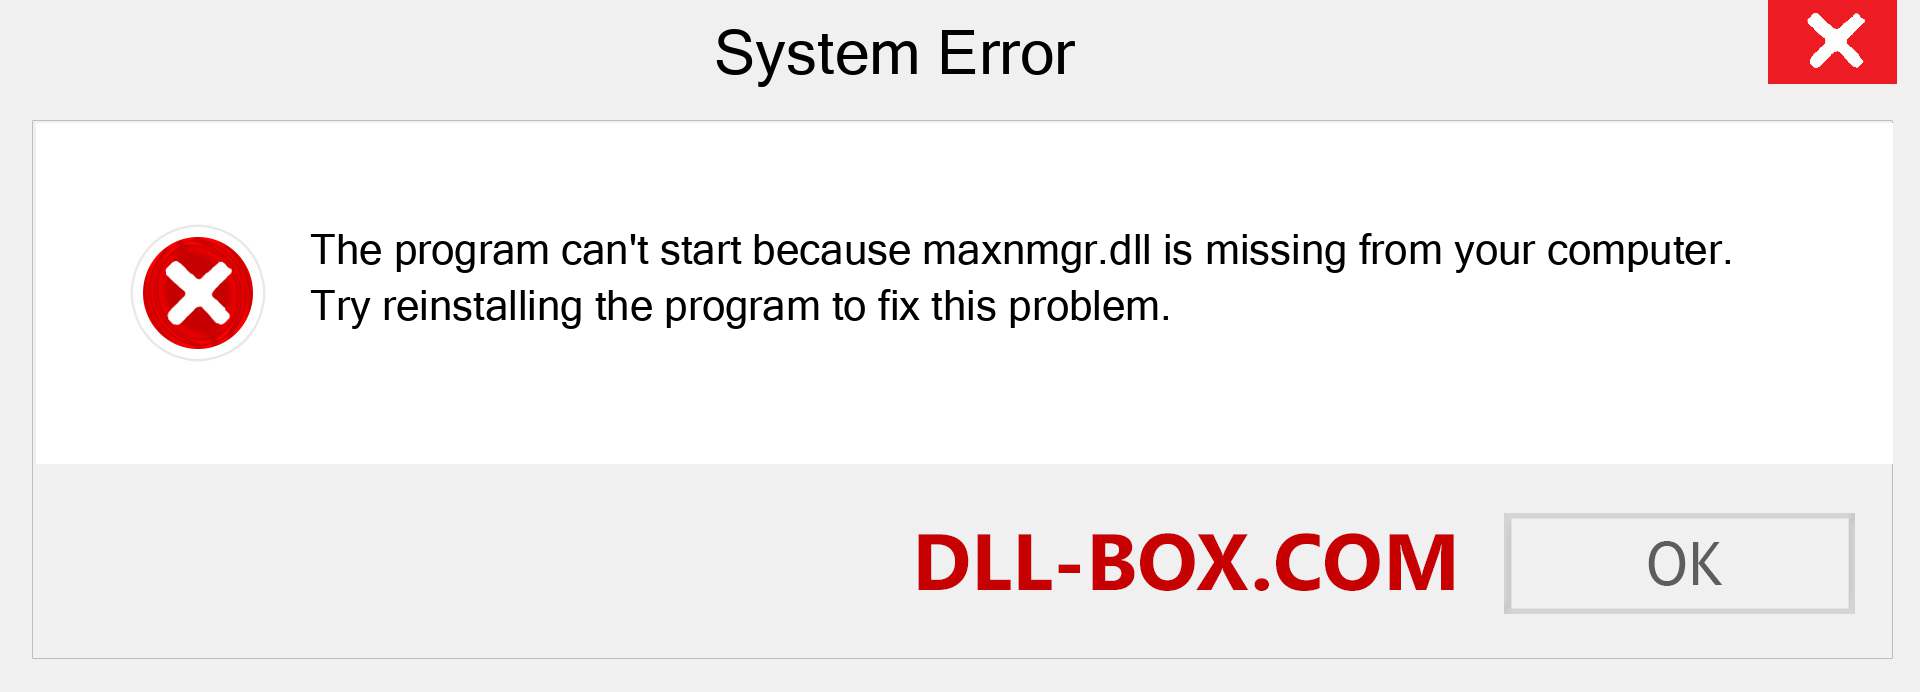  maxnmgr.dll file is missing?. Download for Windows 7, 8, 10 - Fix  maxnmgr dll Missing Error on Windows, photos, images